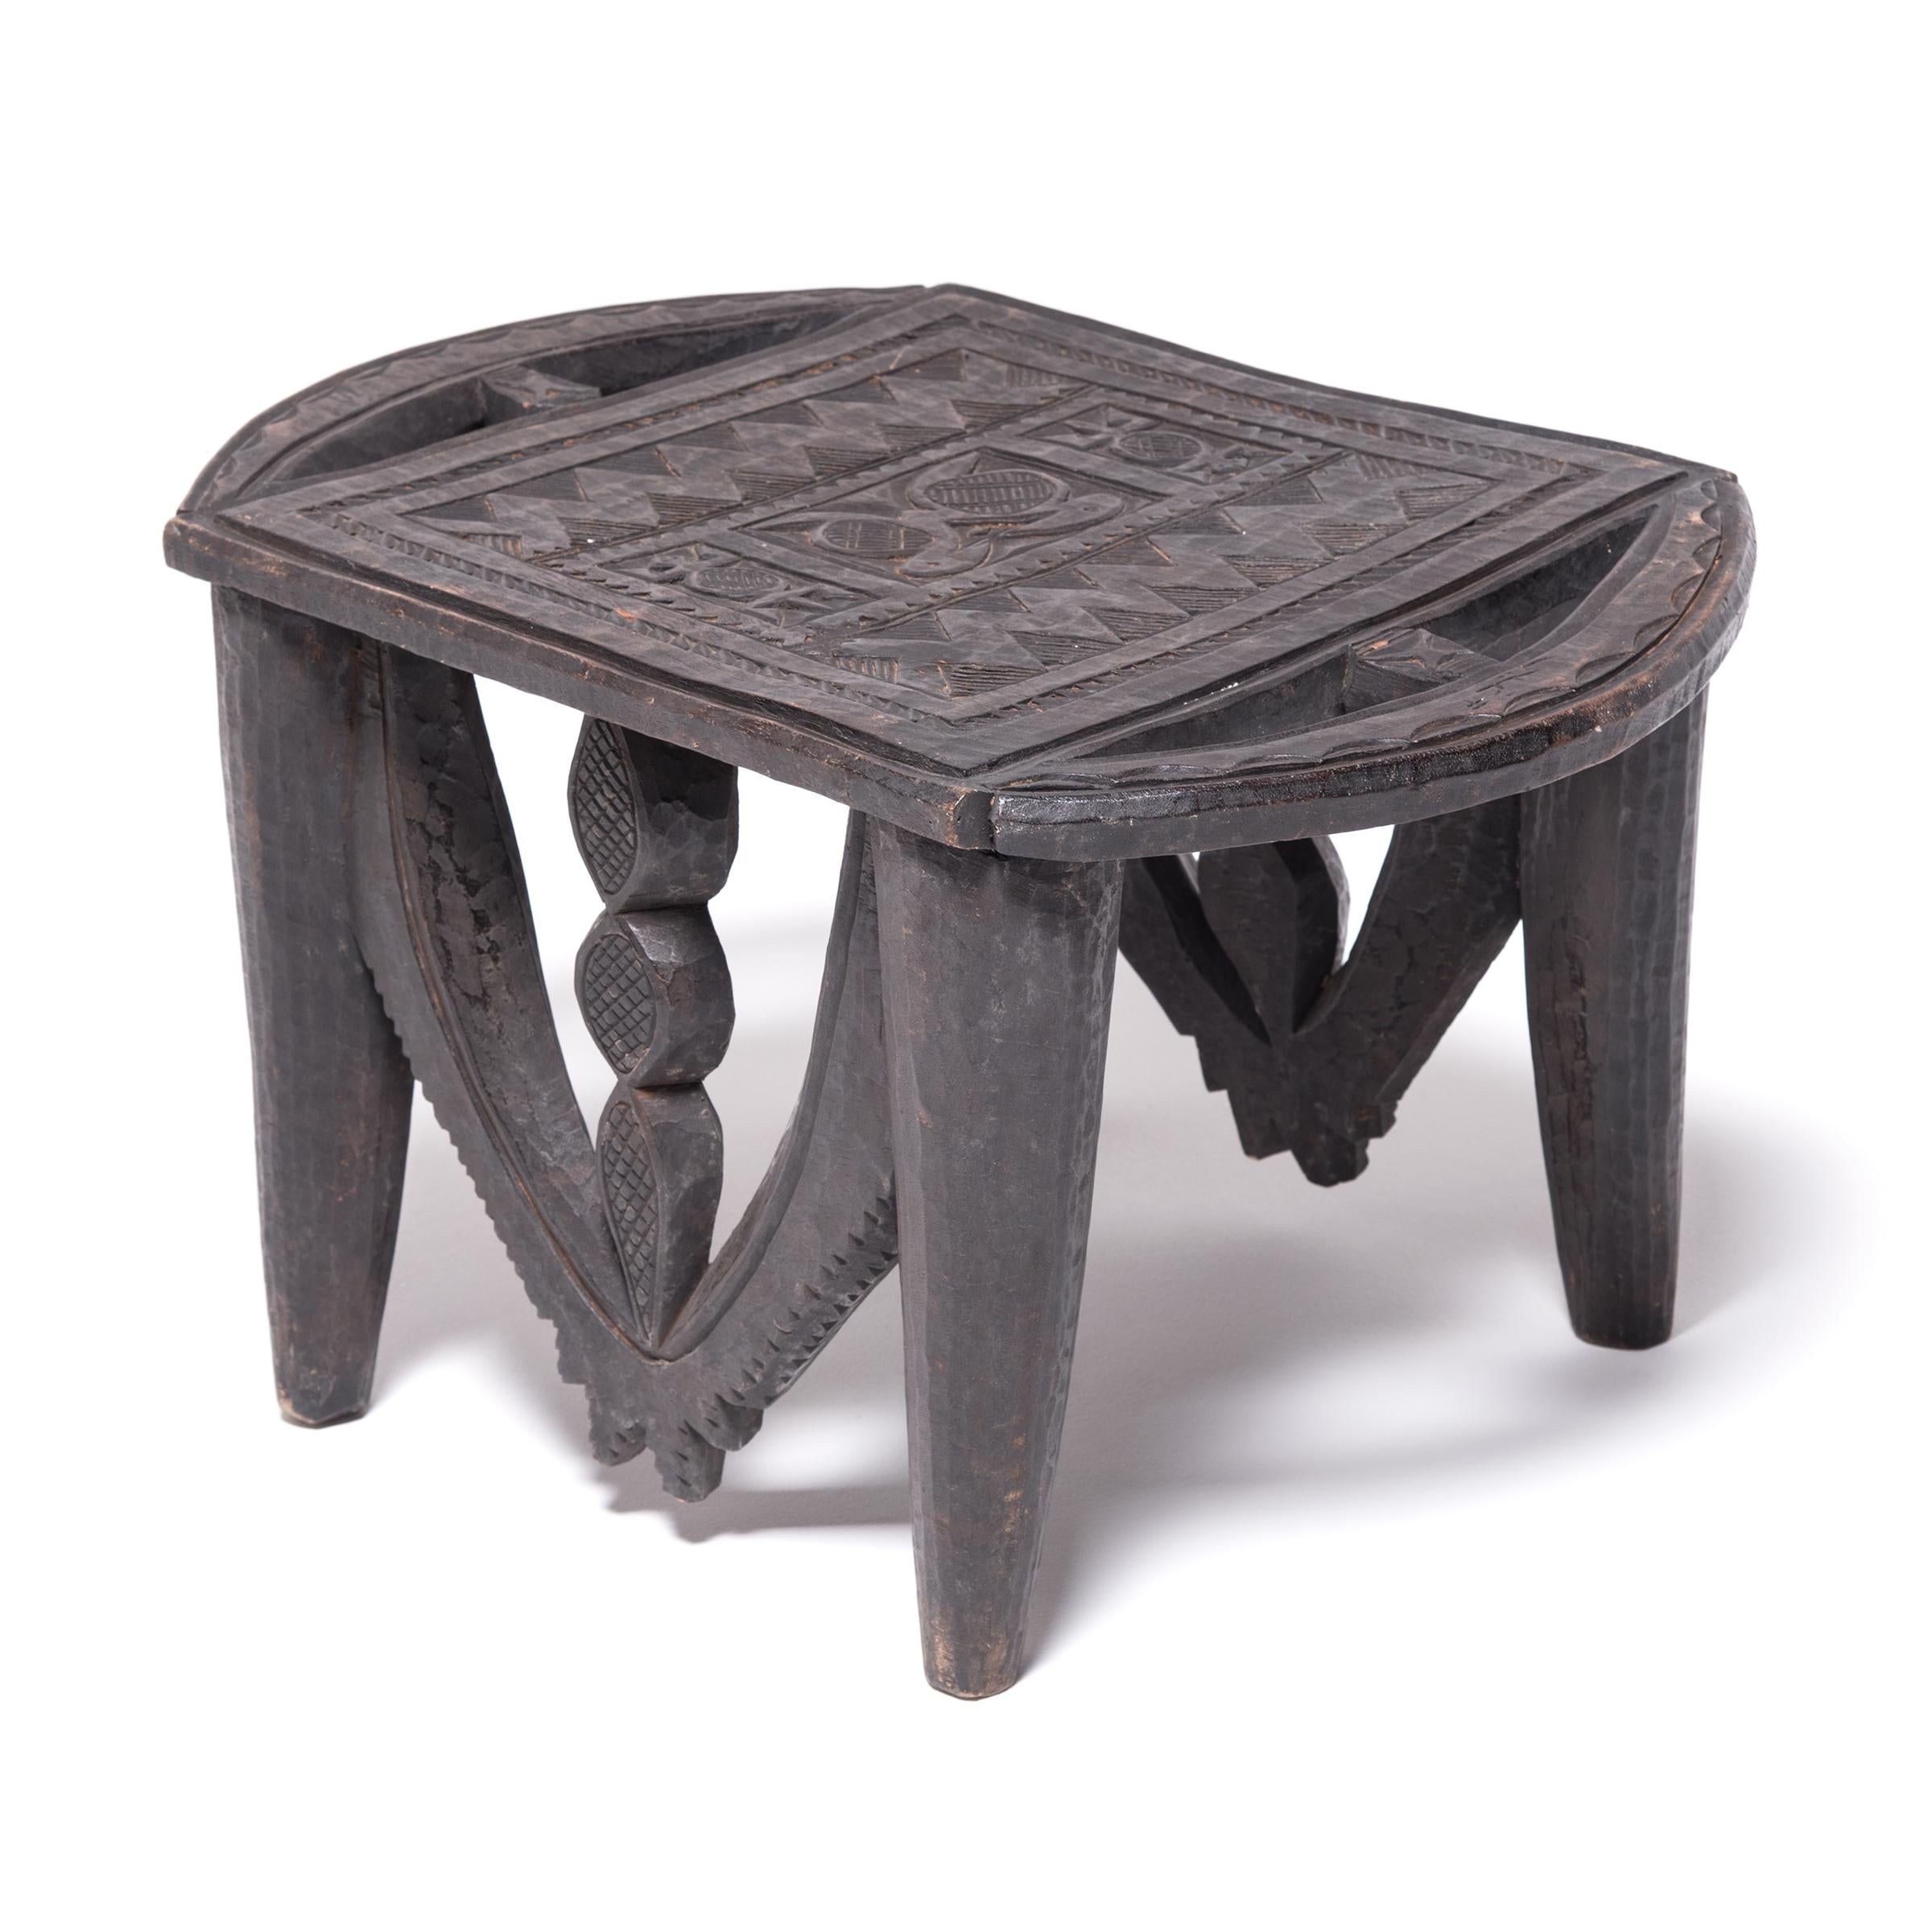 The Nupe people express the widest variety of stool forms among African tribes. Each is carved from a single piece of wood, decorated with abstract designs, and - most notably - cut so that the grain of the wood always runs horizontally. The mixture